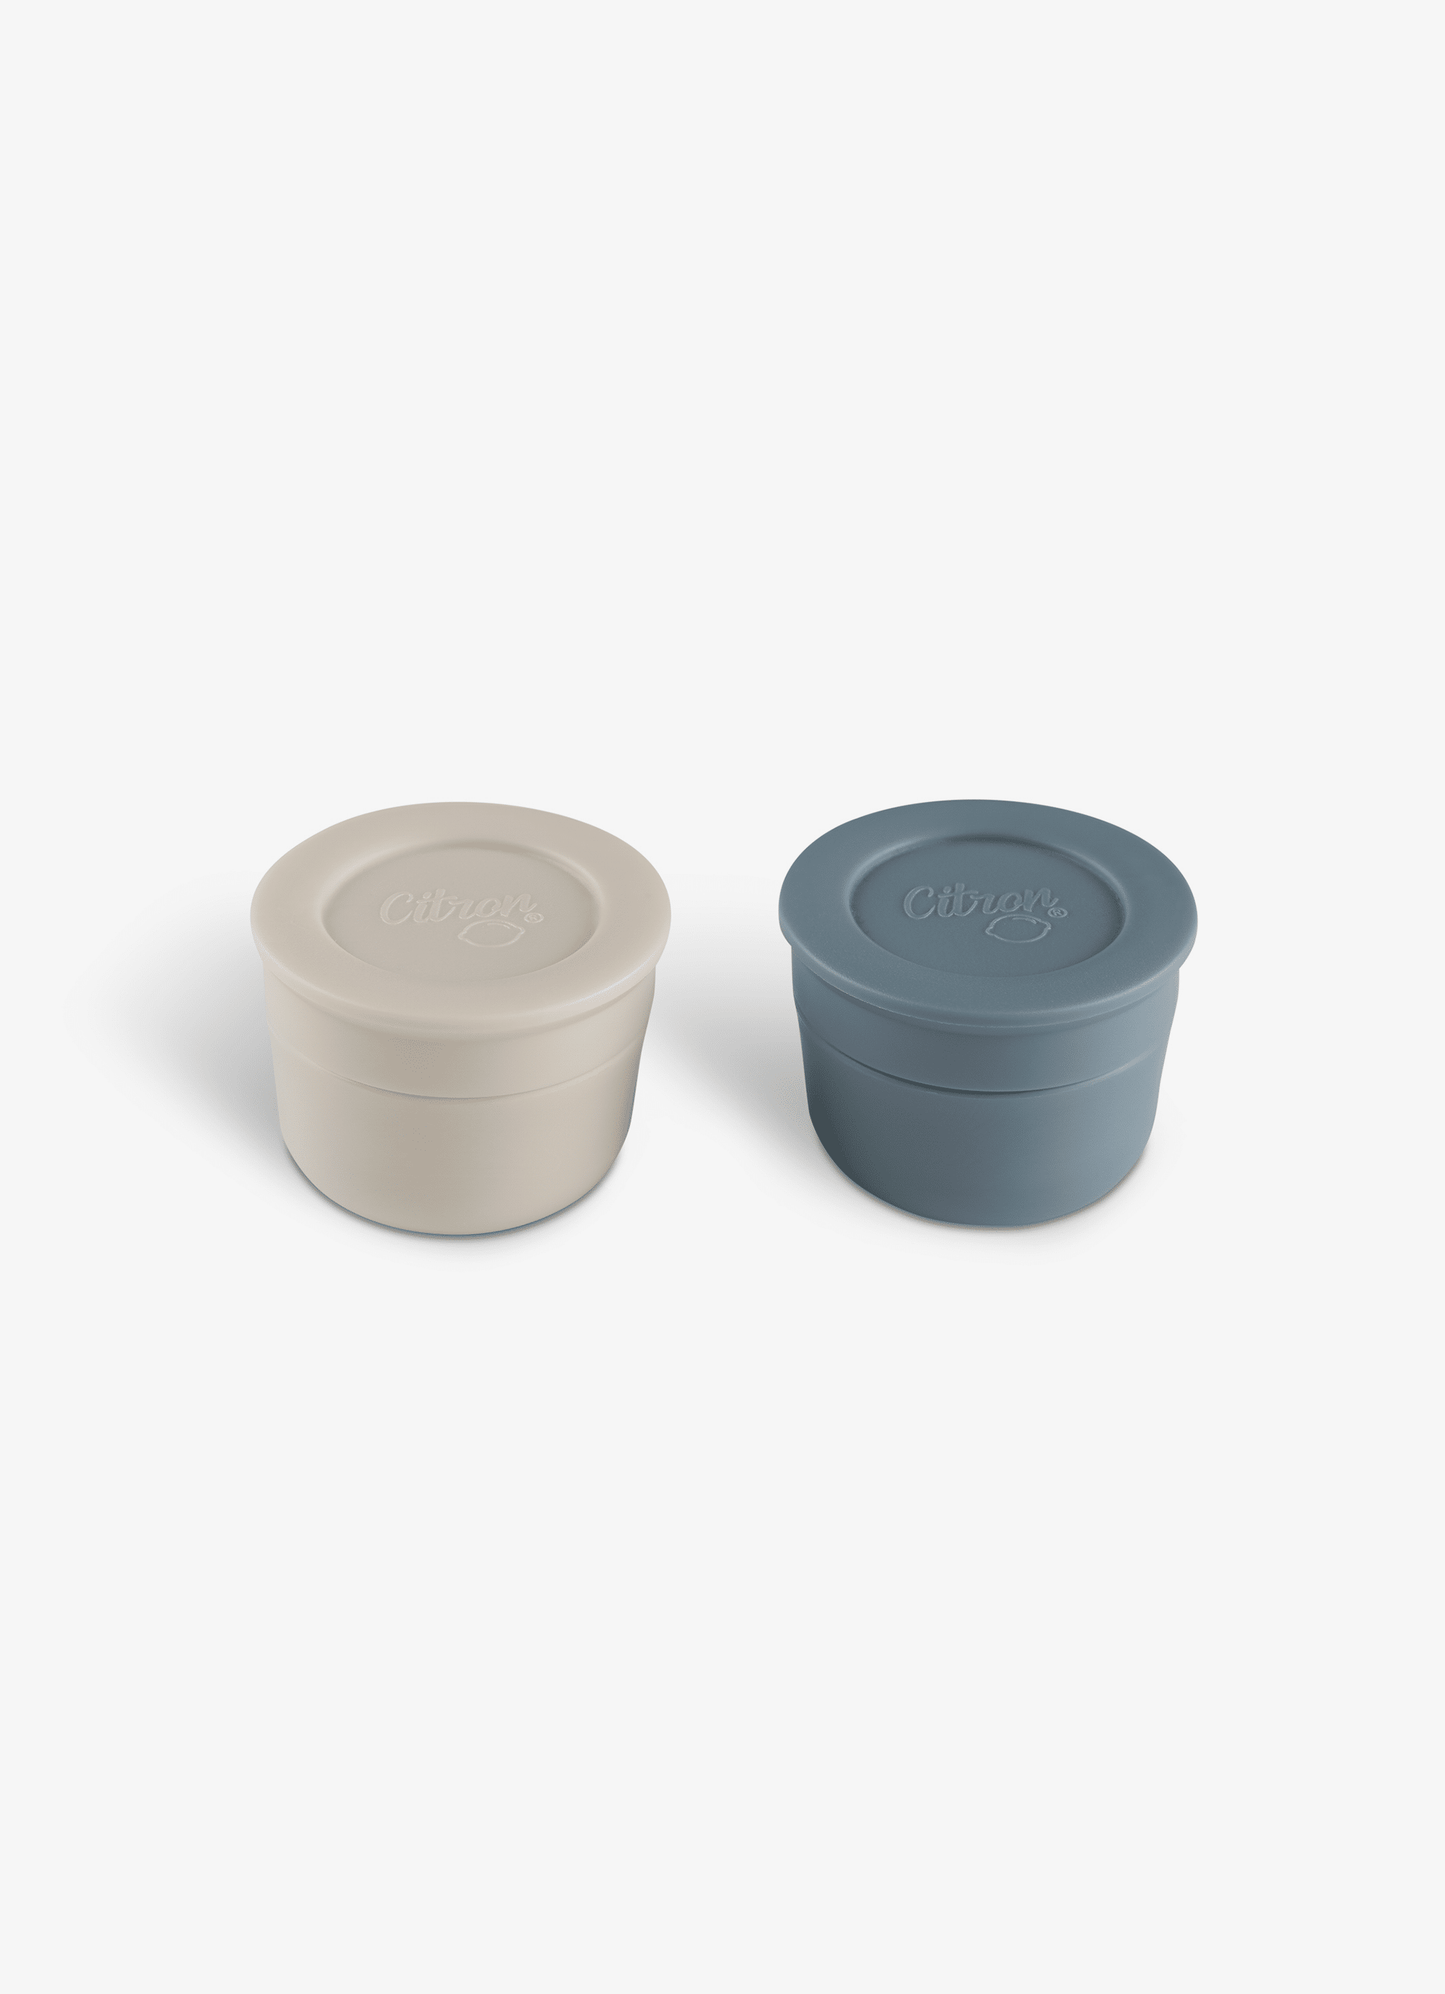 Mini Sauce Containers - Dusty Blue & Cool Grey